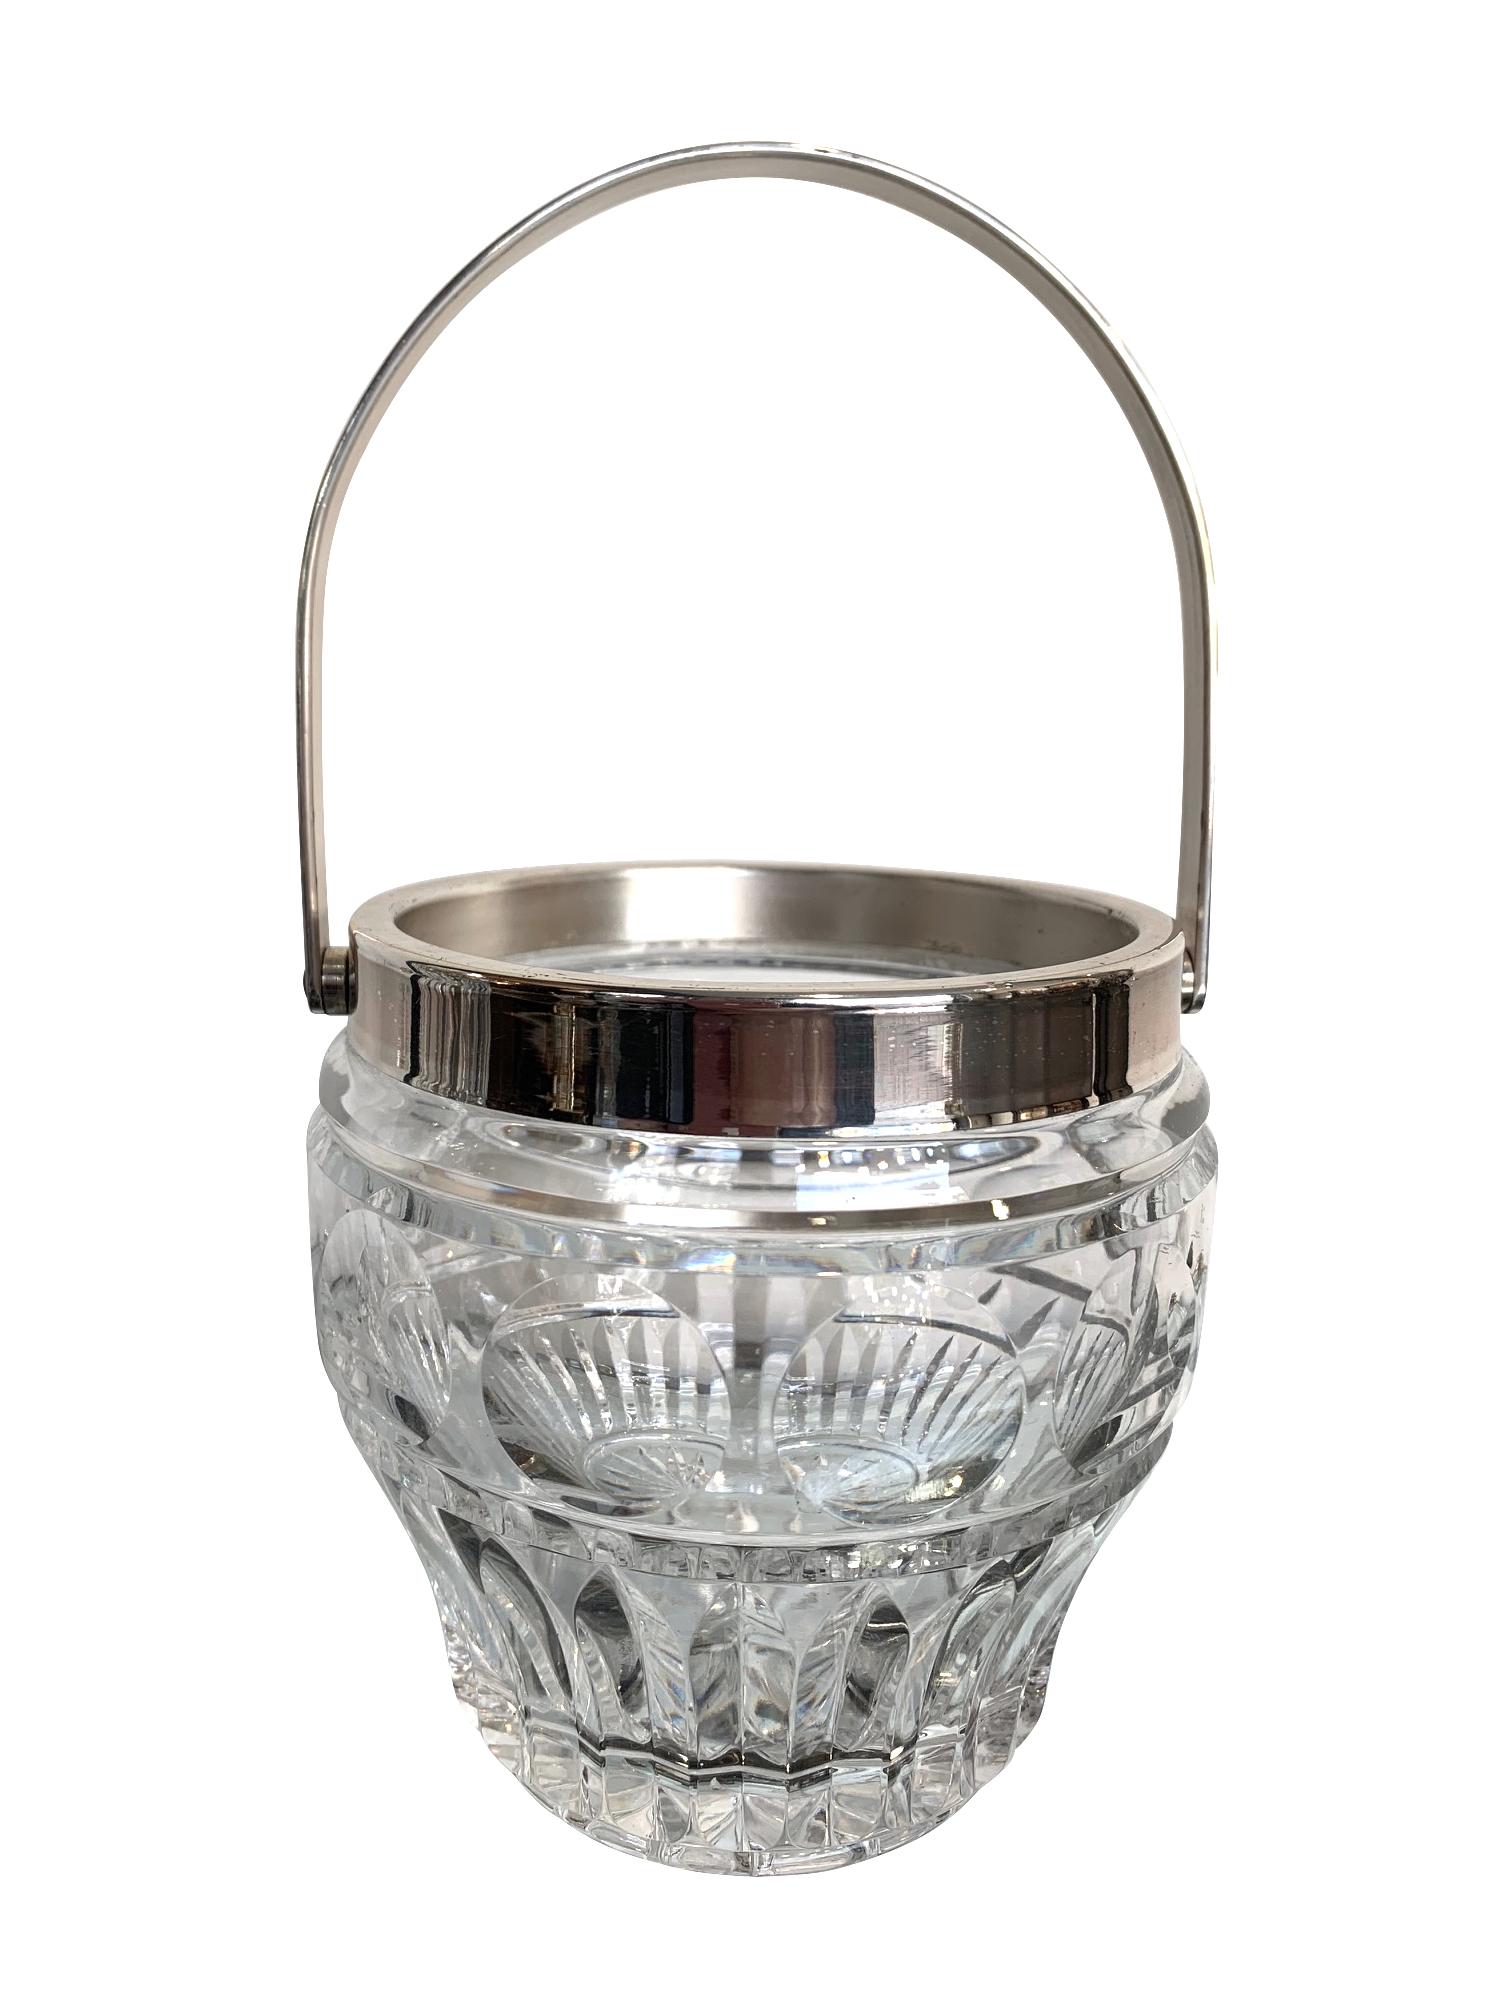 A 1950s Val Saint Lambert crystal and silver plate cocktail Shaker and matching ice bucket with handle, both with circular and faceted pattern design.